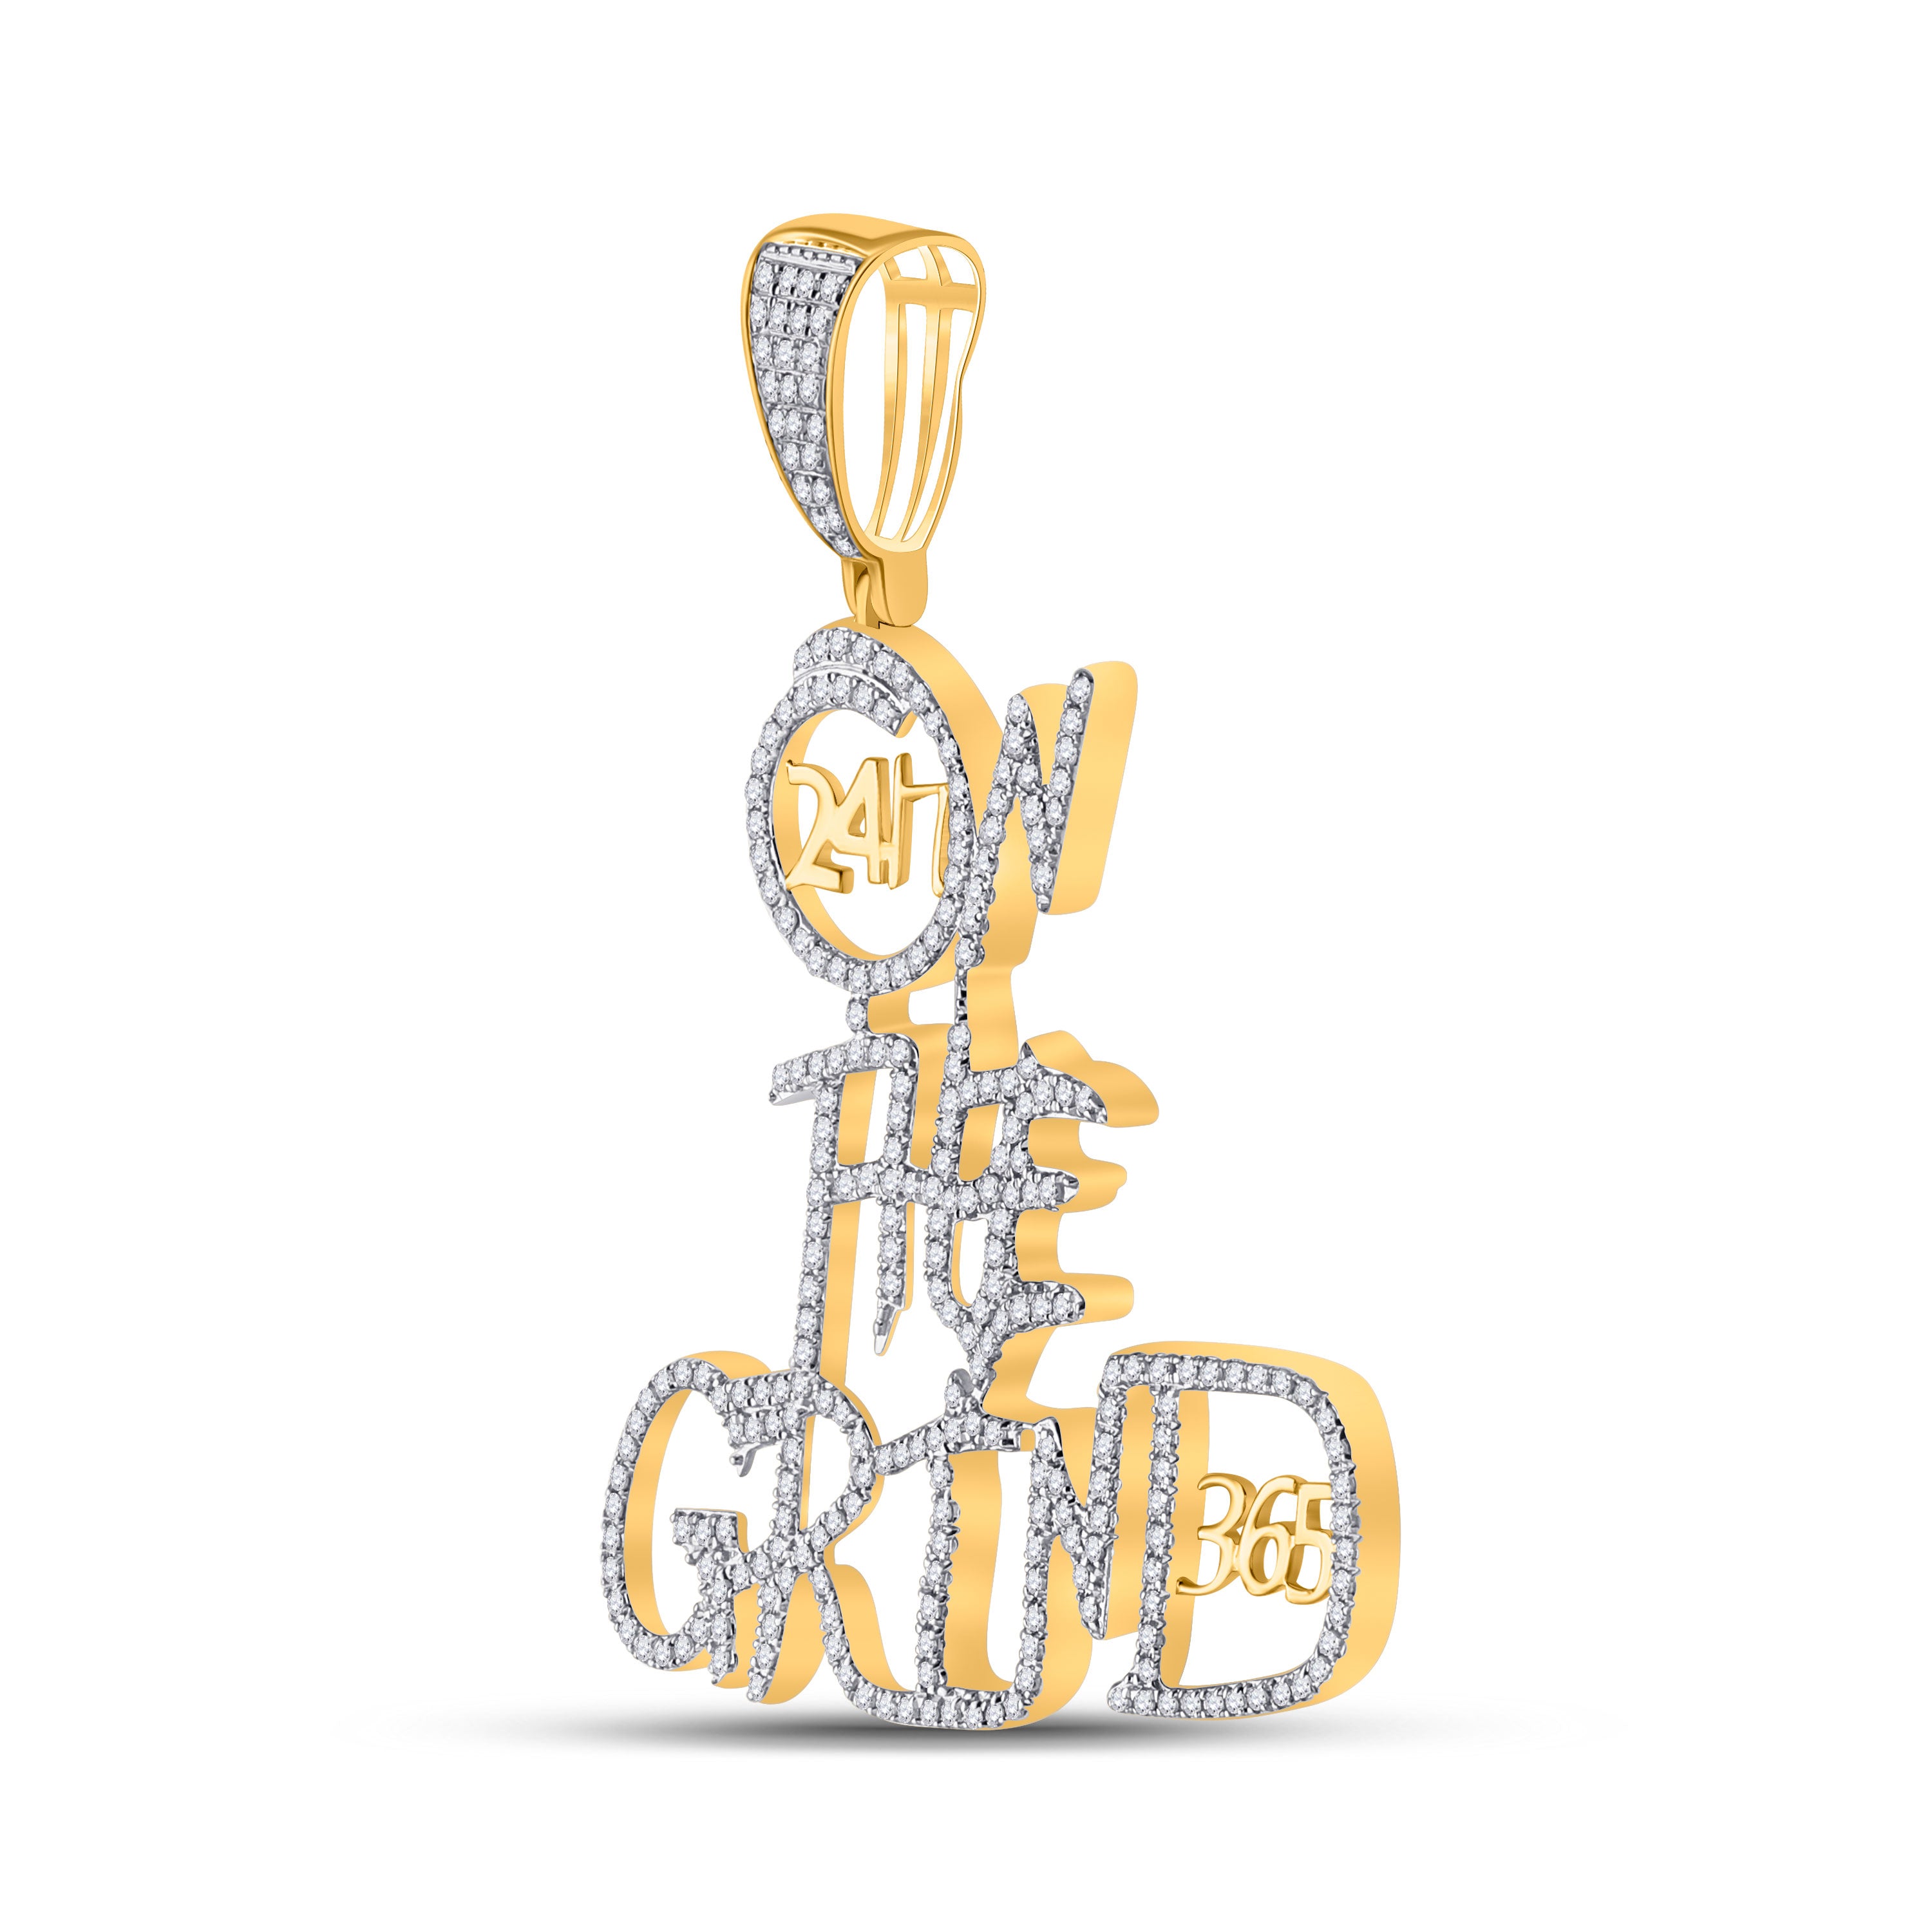 10kt Yellow Gold Mens Round Diamond On The Grind Phrase Charm Pendant 3/4 Cttw